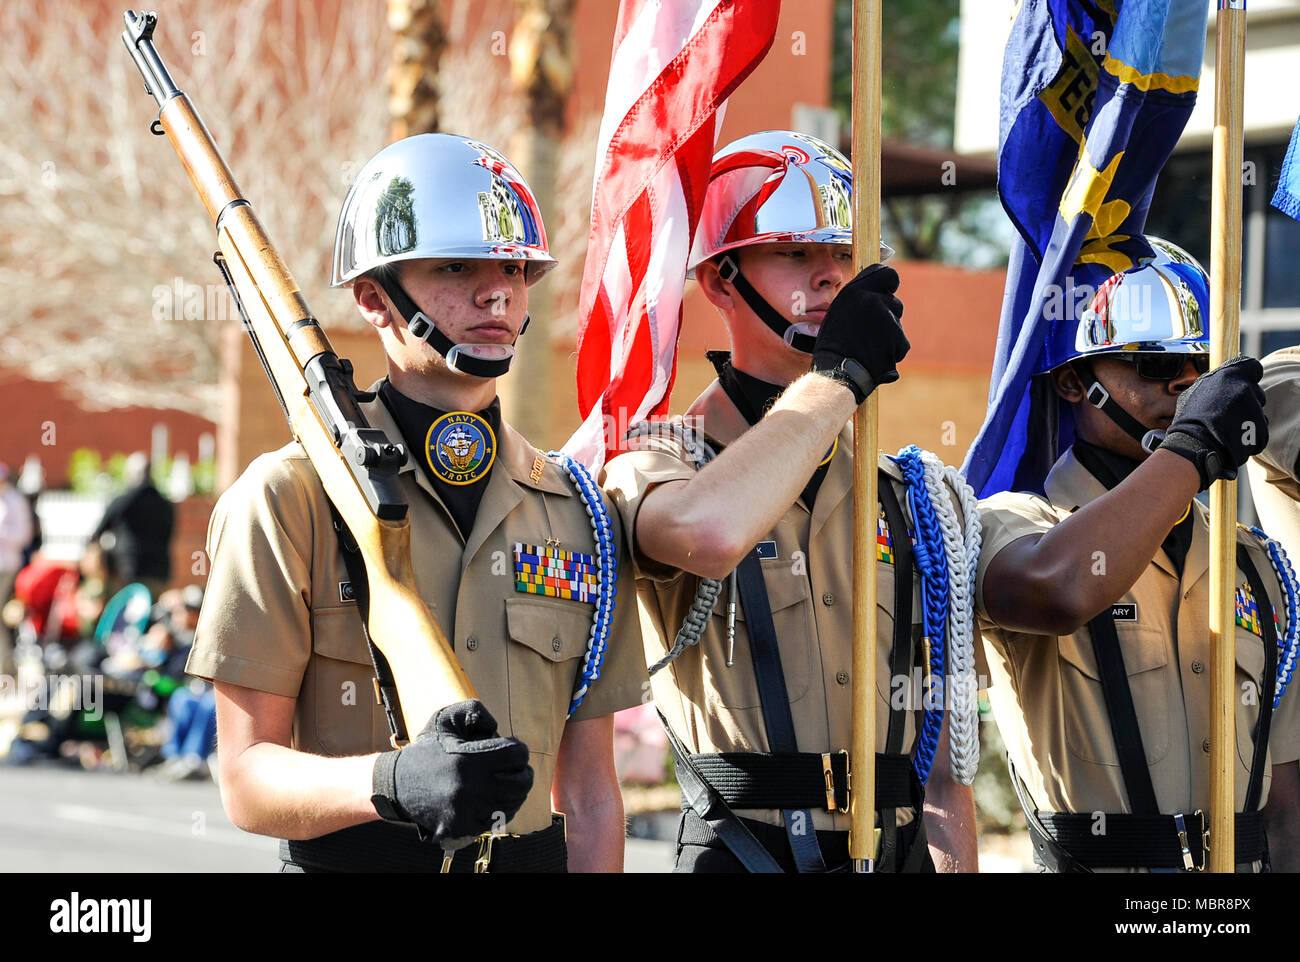 Las Vegas, Nevada - January 15, 2018 -   JROTC marching in the Dr. Martin Luther King Day Parade in downtown Las Vegas - Photo: Ken Howard/Alamy Stock Photo